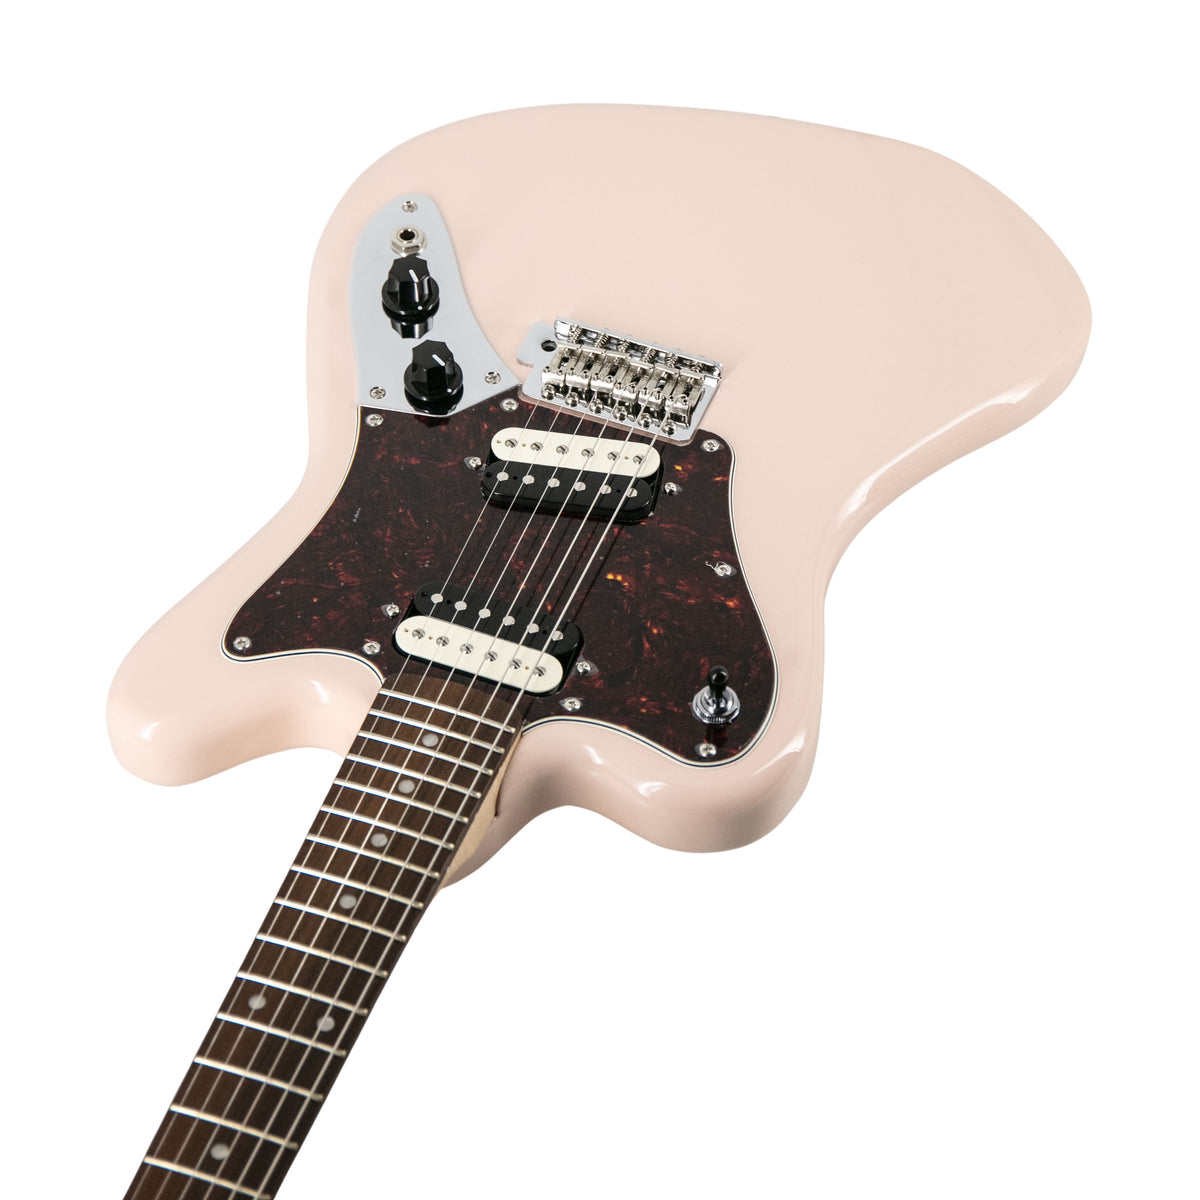 Squier Paranormal Series Super Sonic Electric Guitar, Shell Pink,  CYKL21002490